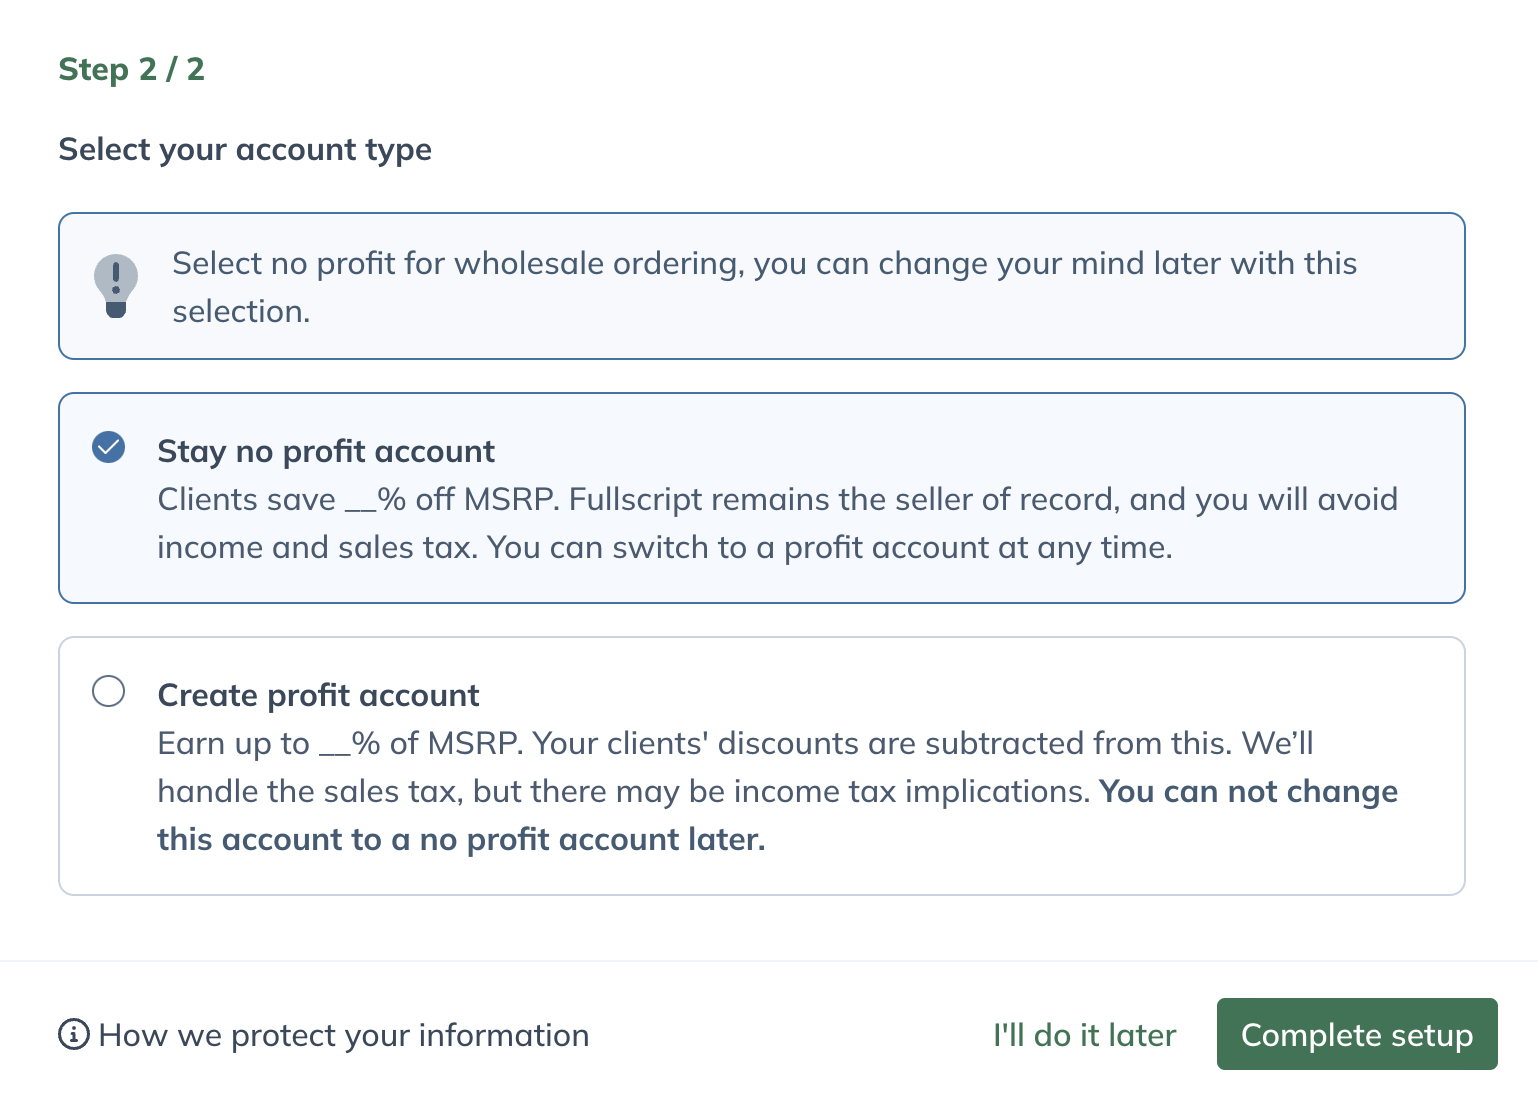 Selecting an account type to complete your account.